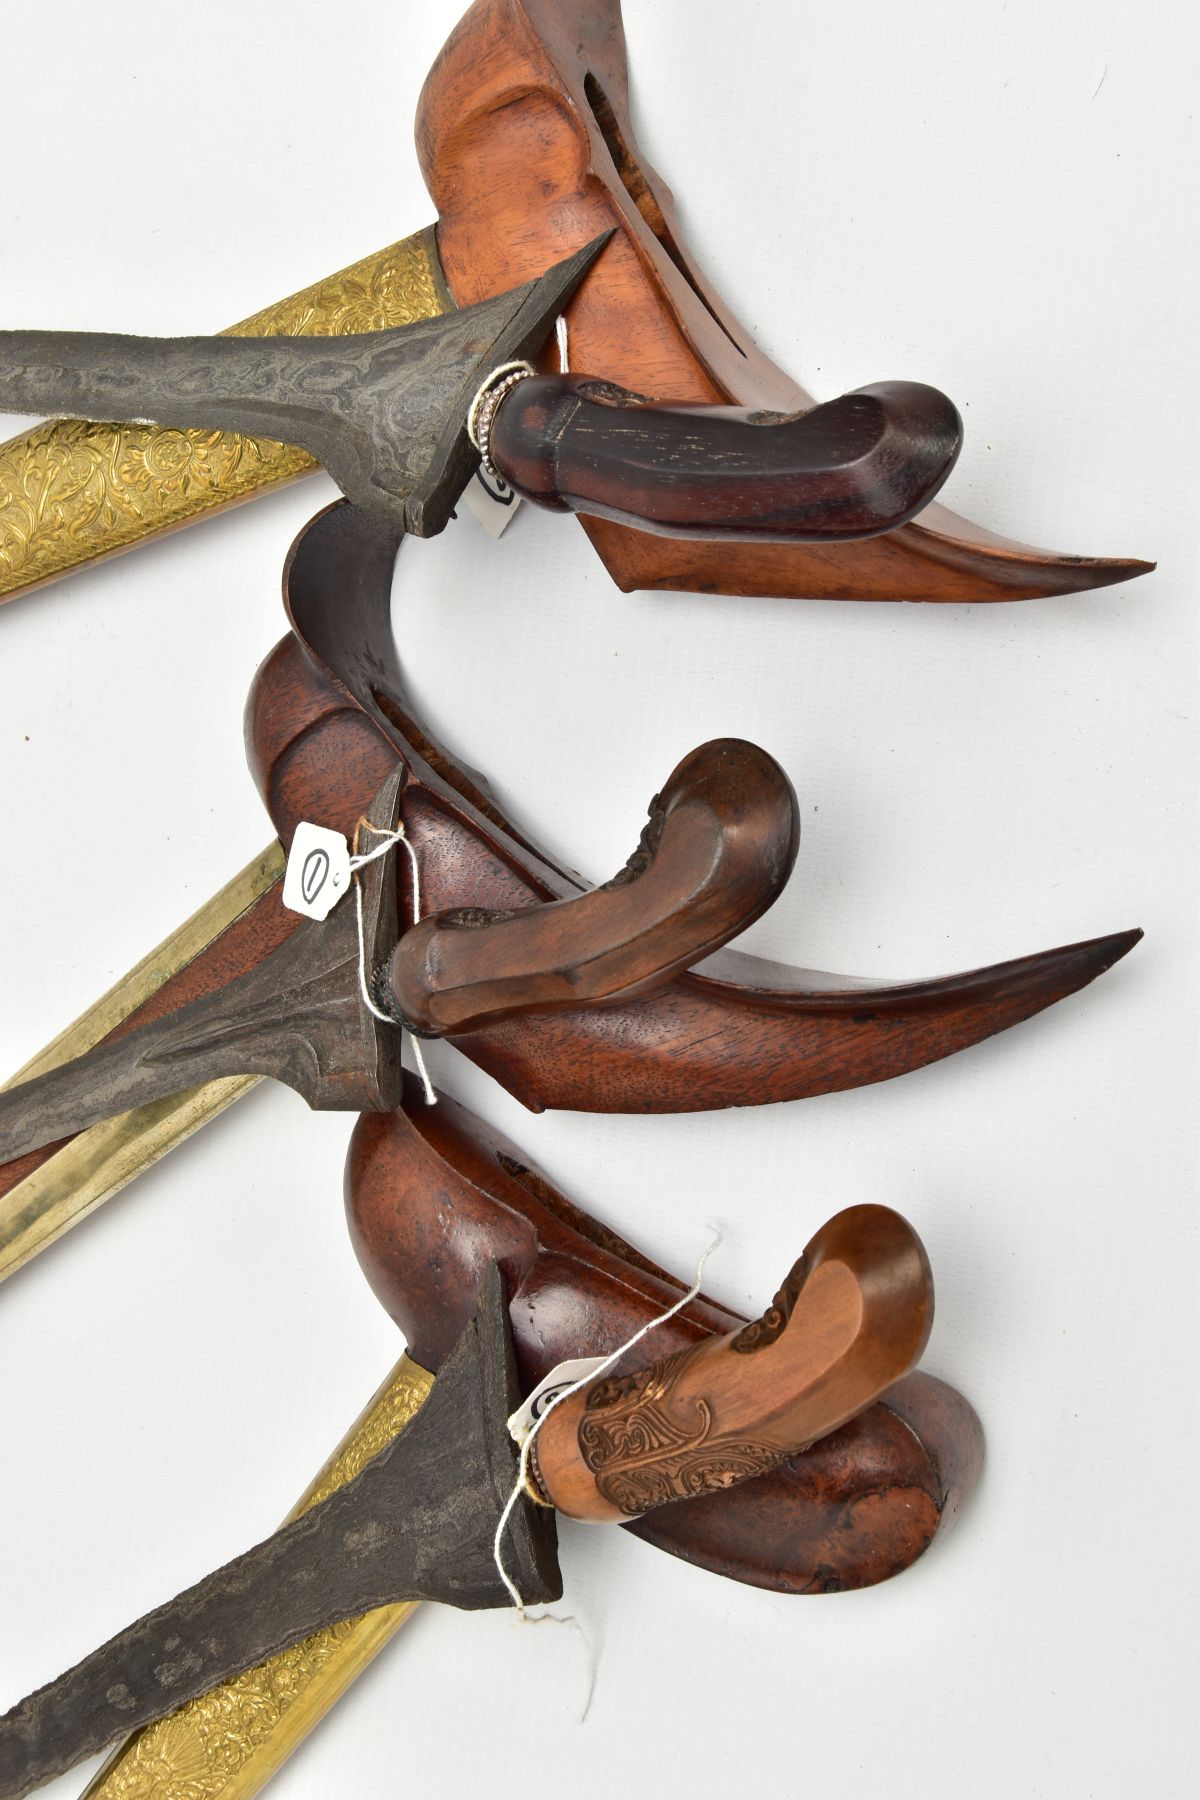 THREE MALAY/INDONESIAN KRIS DAGGERS, all straight blades(bilah), with age, the Bilah are rusted, the - Image 9 of 10